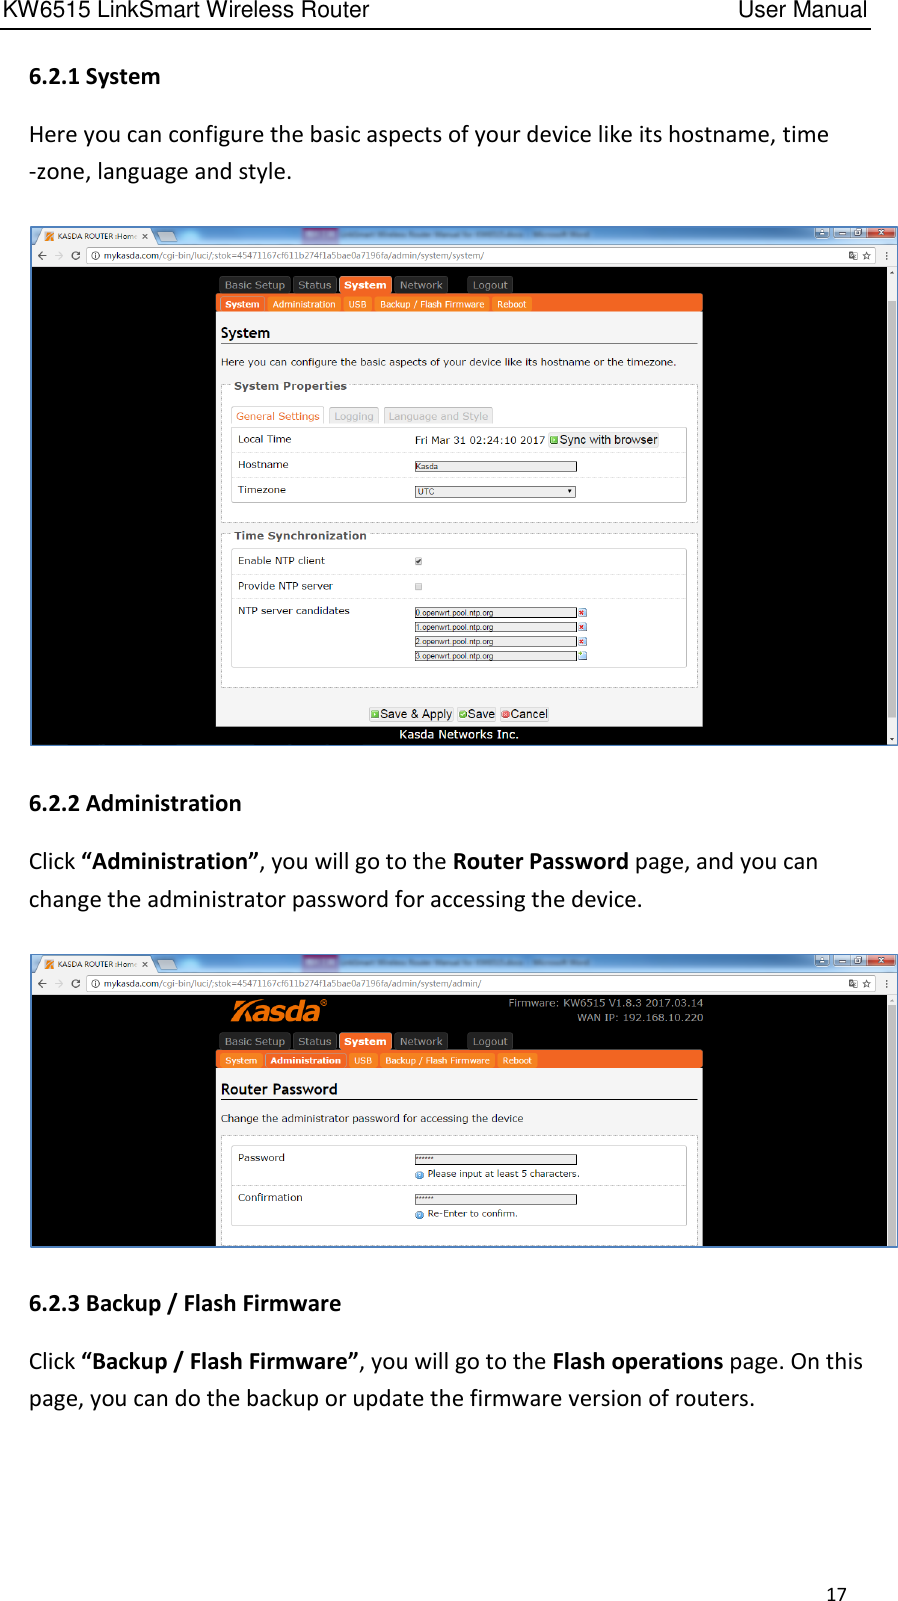 KW6515 LinkSmart Wireless Router         User Manual 17 6.2.1 System Here you can configure the basic aspects of your device like its hostname, time -zone, language and style.  6.2.2 Administration Click “Administration”, you will go to the Router Password page, and you can change the administrator password for accessing the device.  6.2.3 Backup / Flash Firmware Click “Backup / Flash Firmware”, you will go to the Flash operations page. On this page, you can do the backup or update the firmware version of routers.   